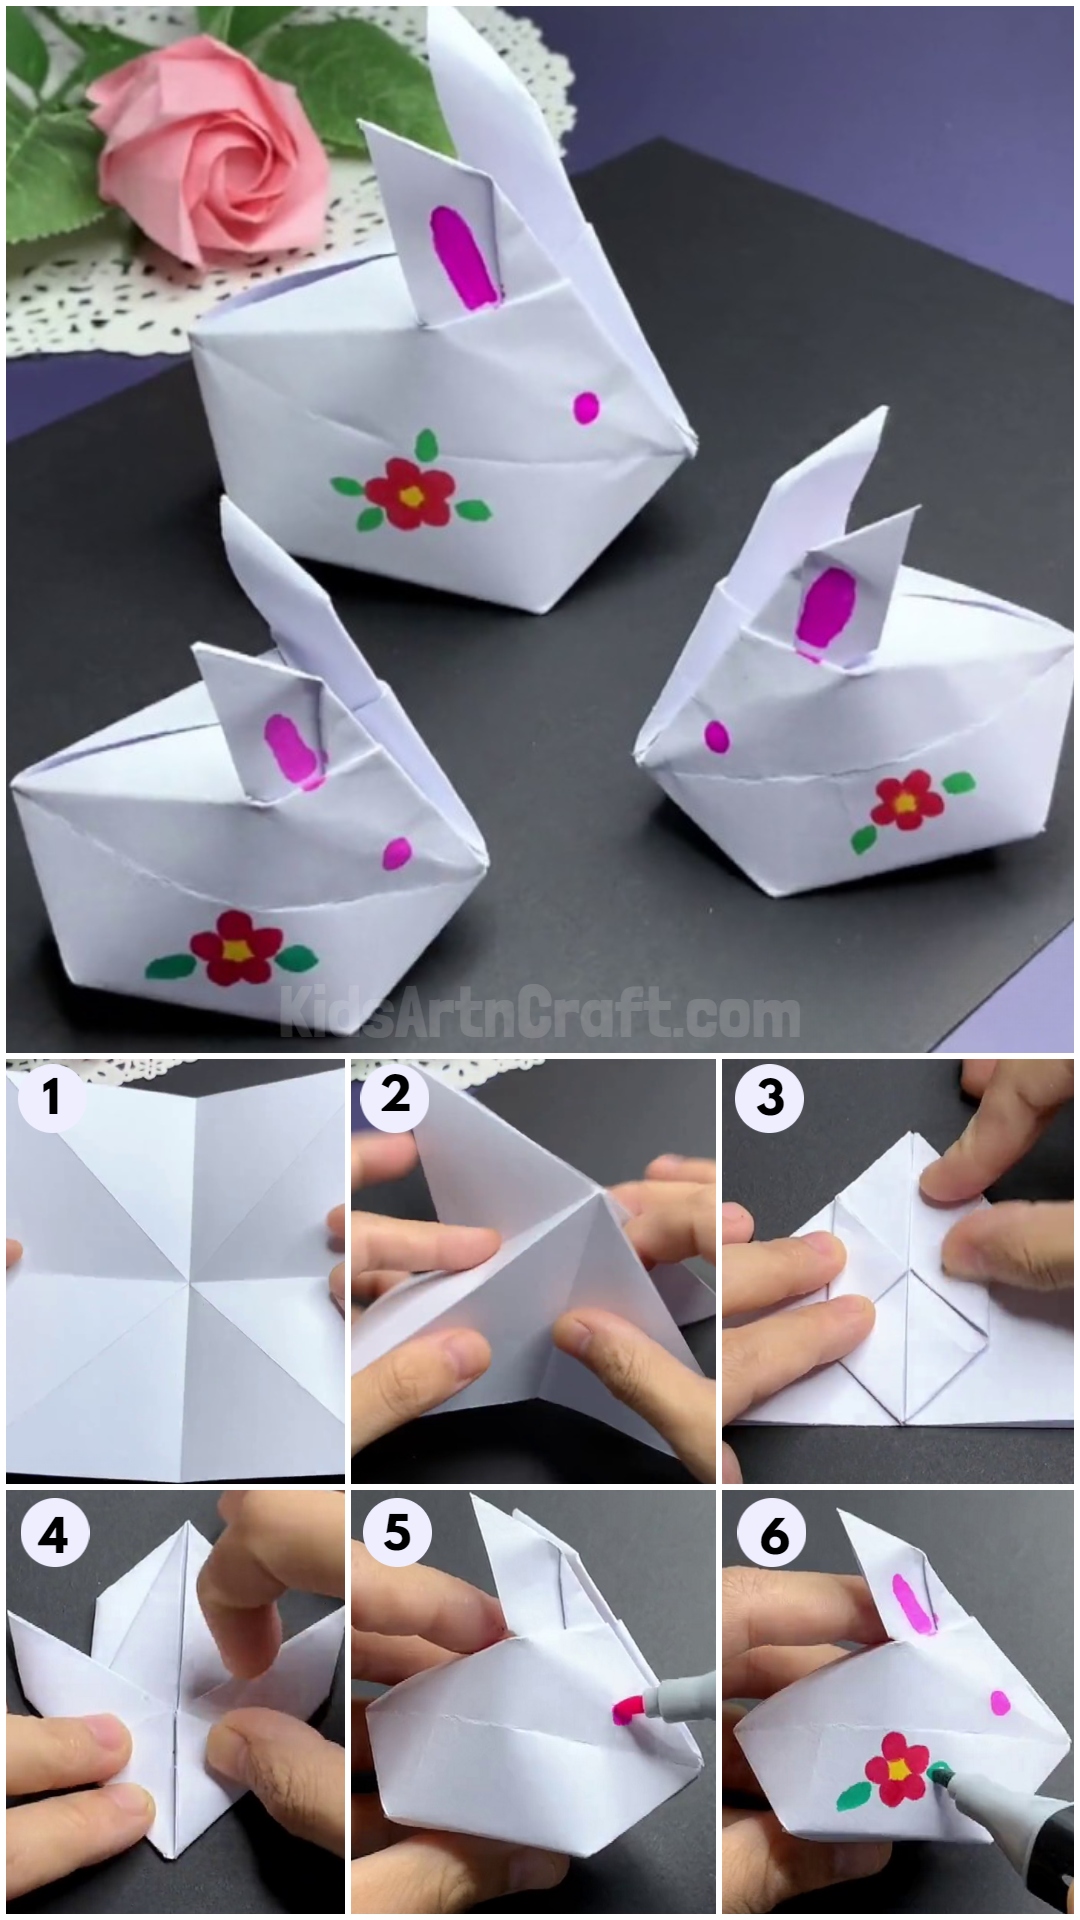 Learn To Make Paper Rabbit Craft For Kids